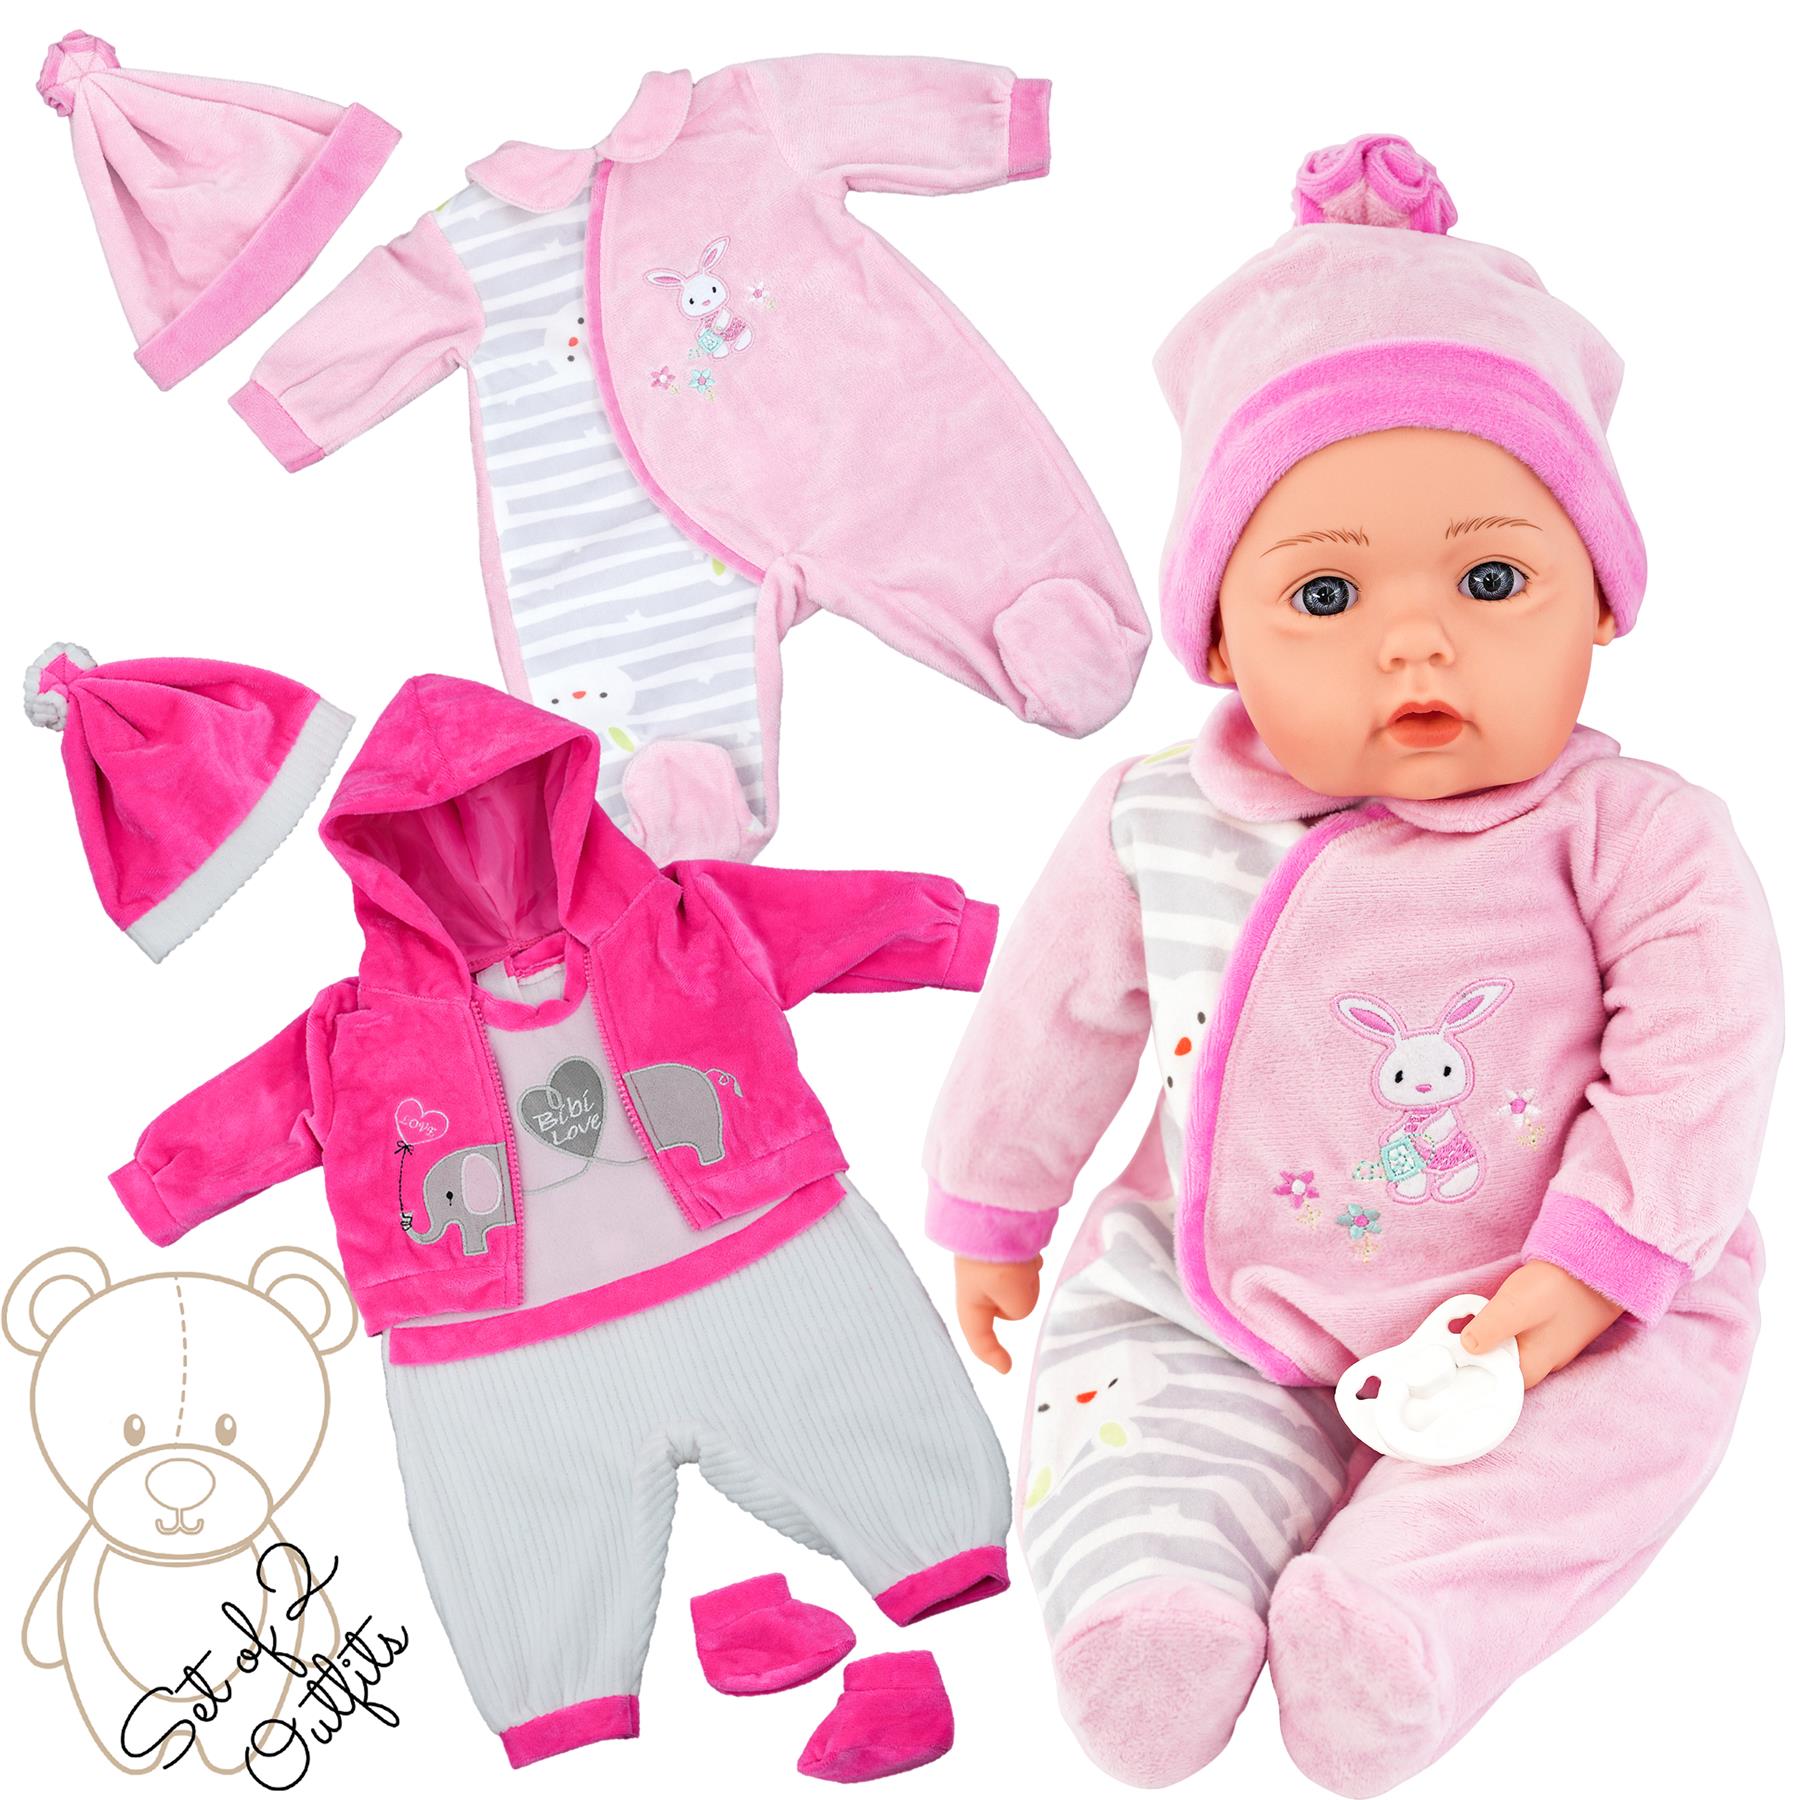 Baby Doll Clothes Set Of Two by BiBi Doll - The Magic Toy Shop